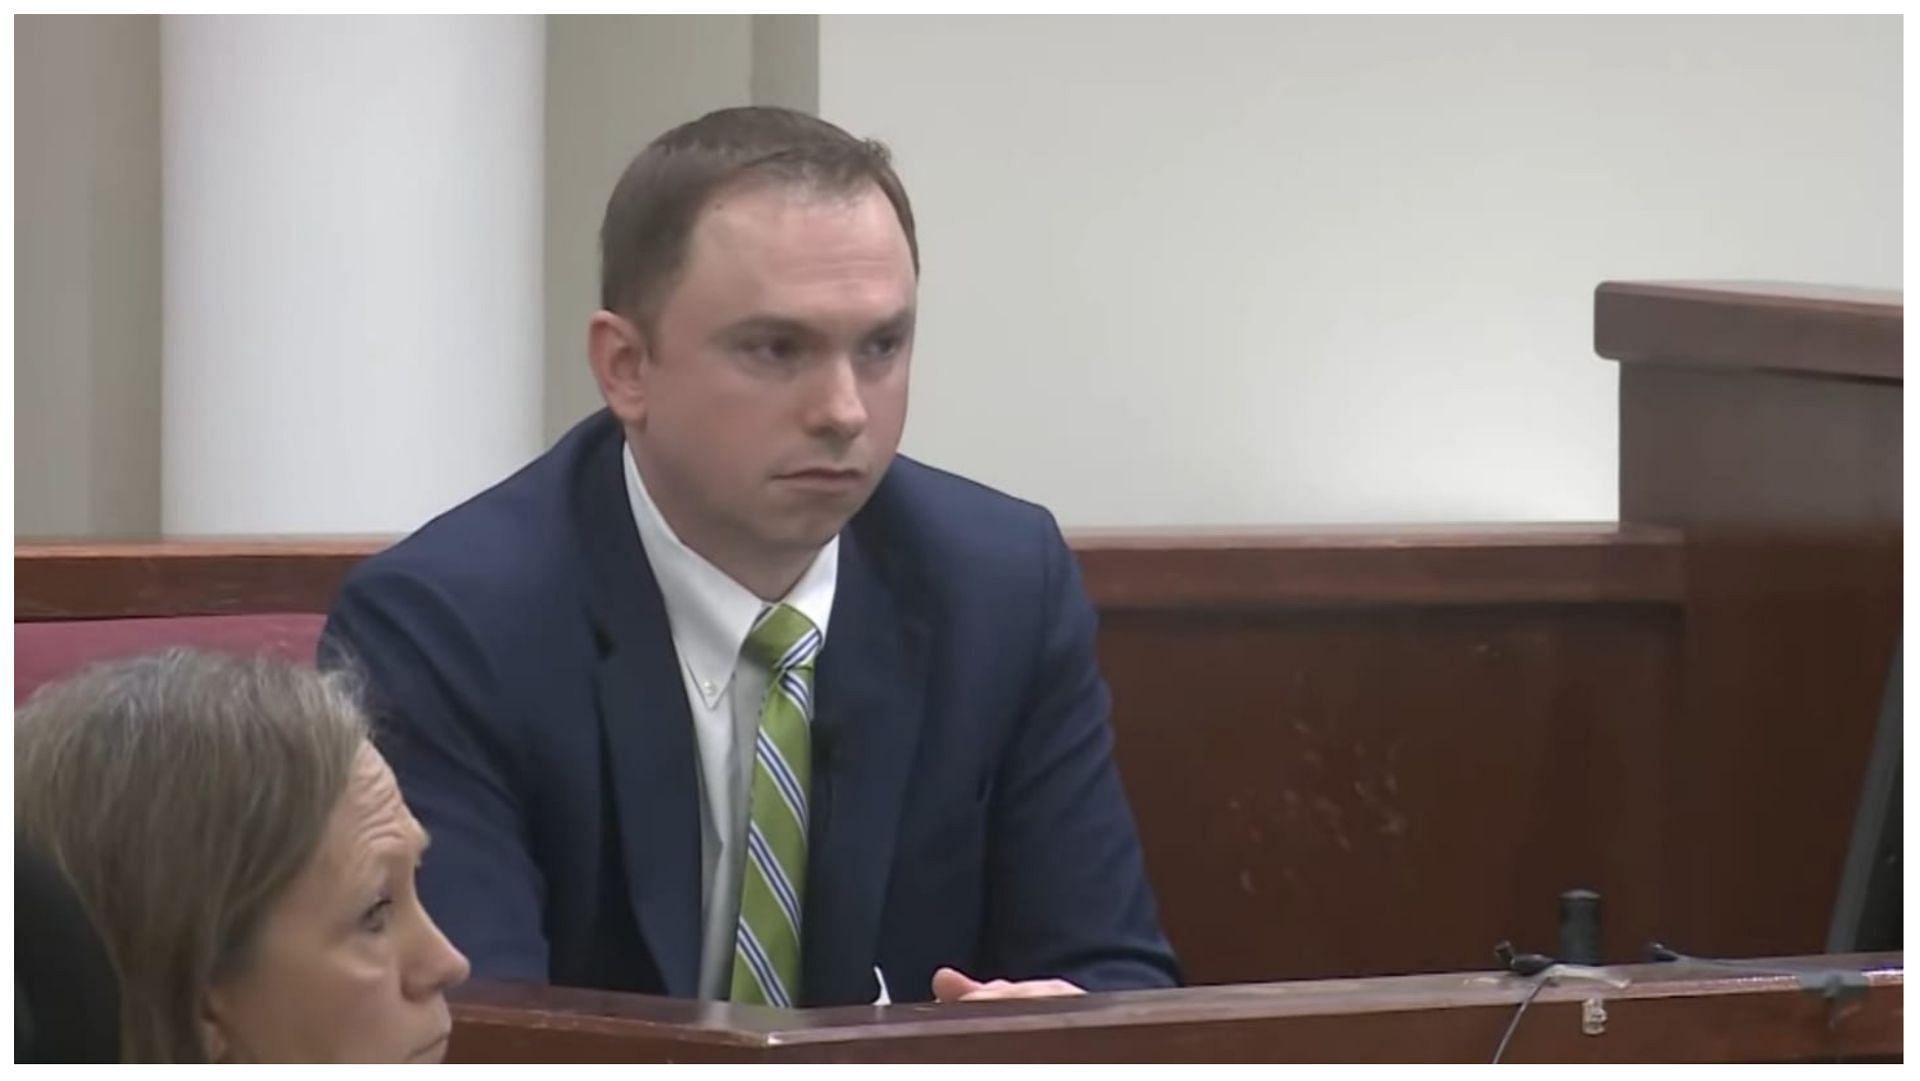 Former cop Aaron Dean testifies in the murder trial of Atatiana Jefferson, (Image via YouTube/Law&amp;Crime Network)